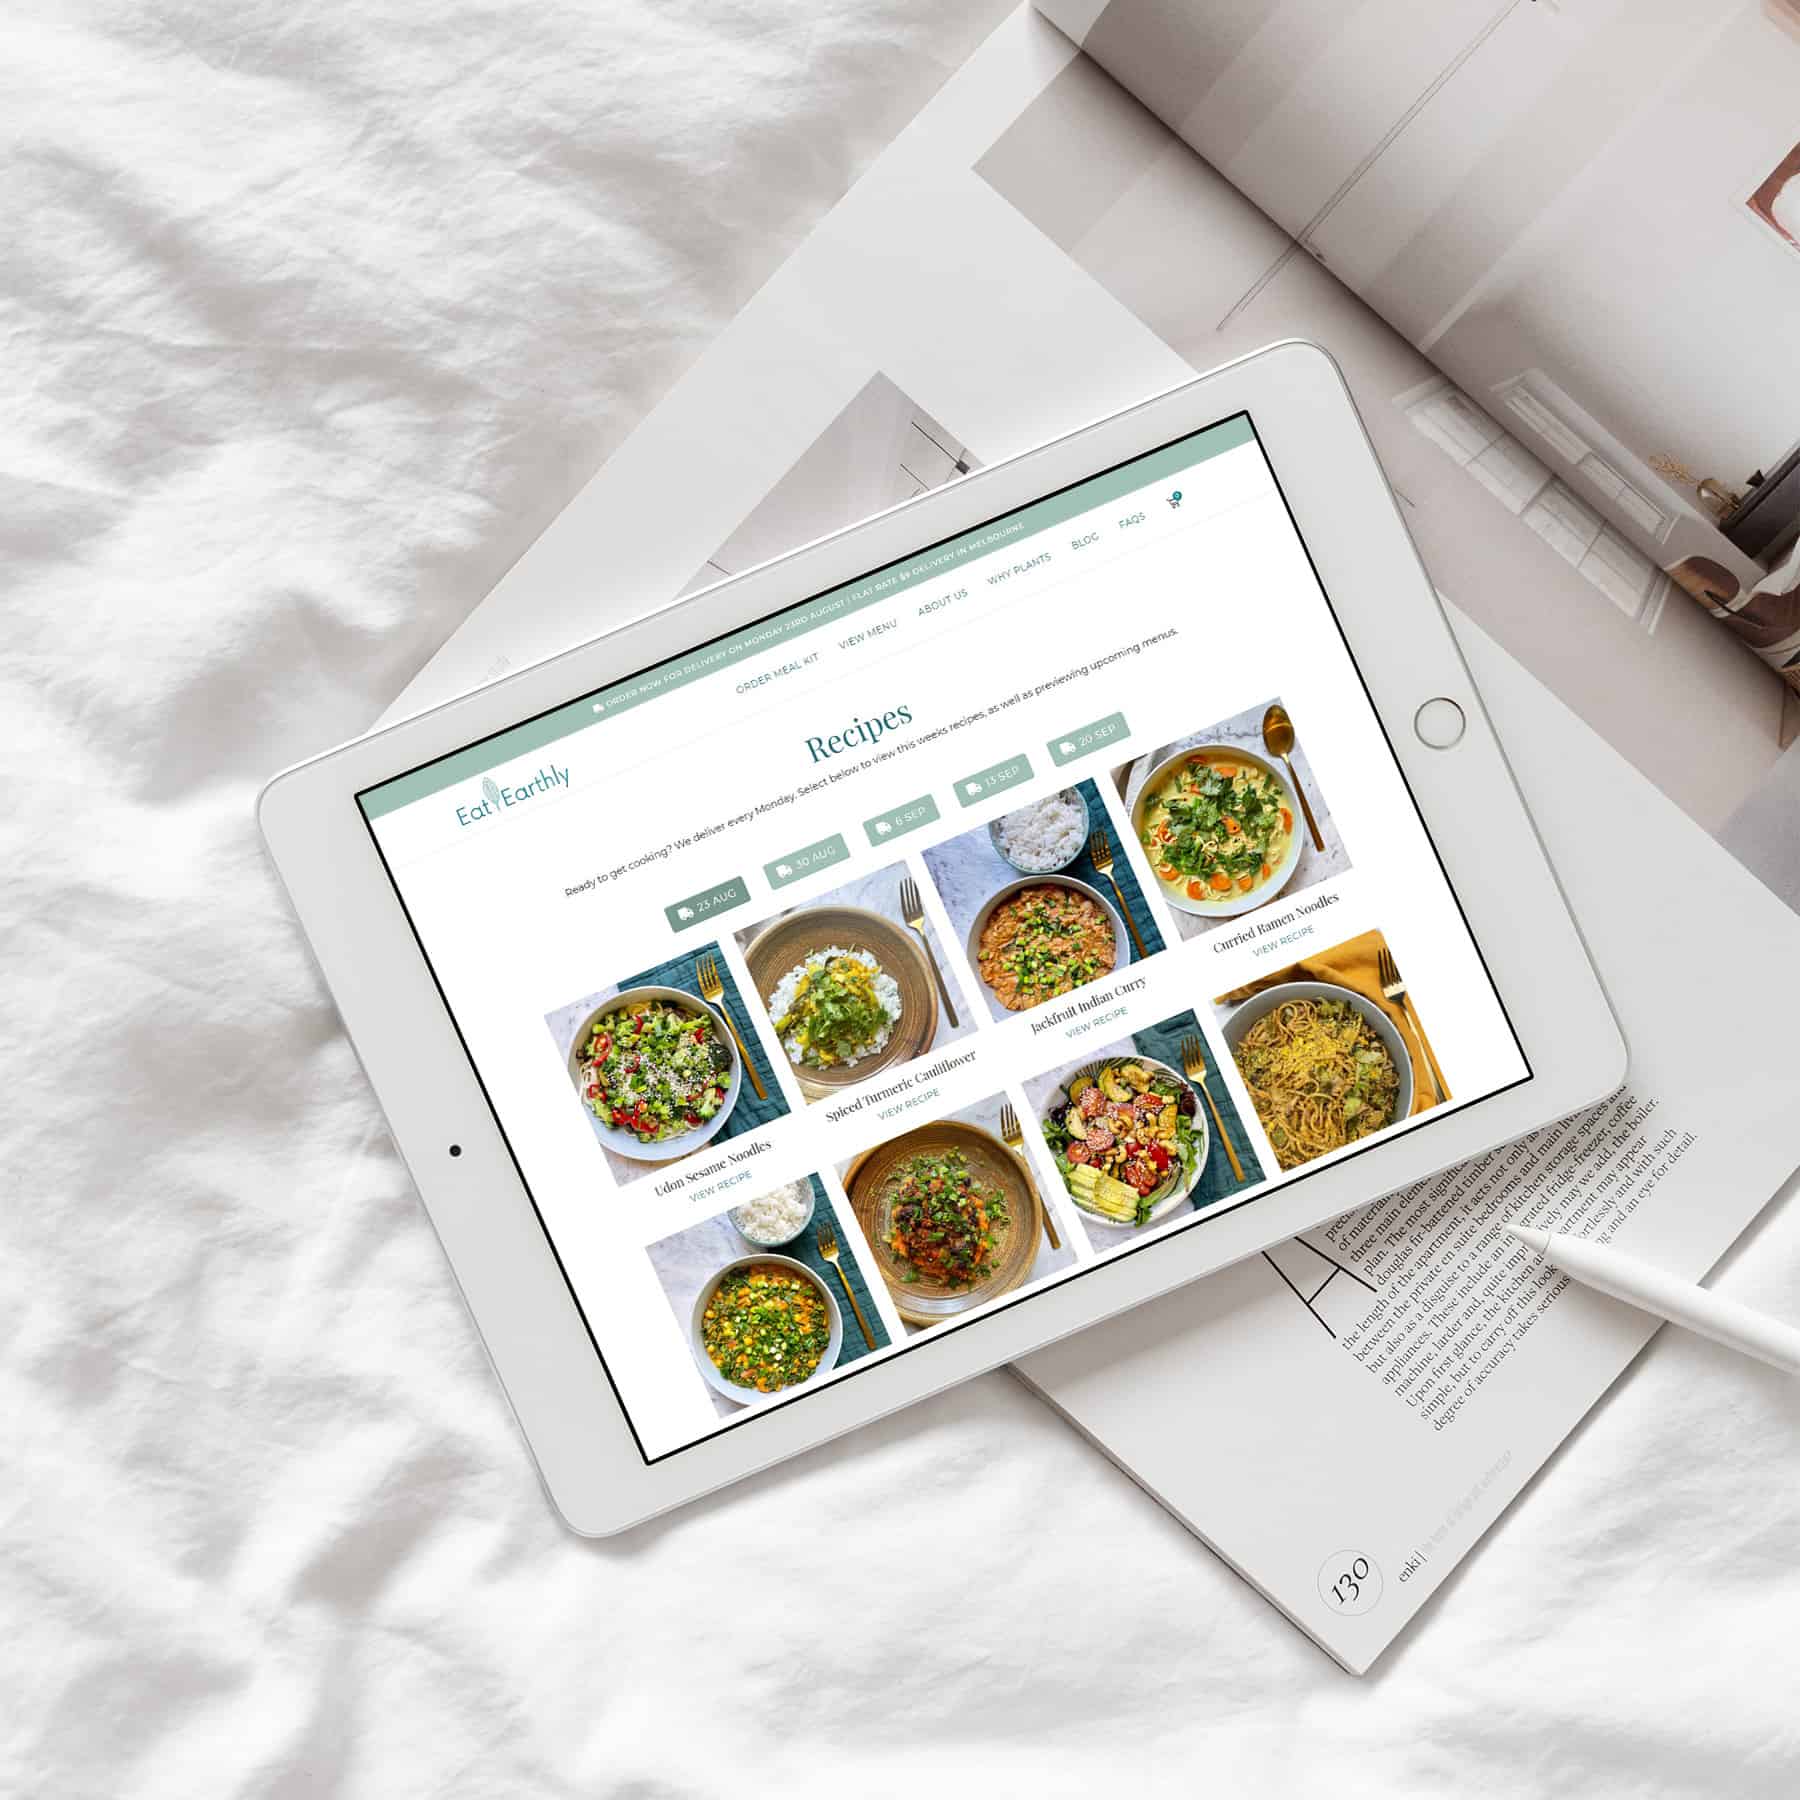 eat earthly meal kit delivery ecommerce website design